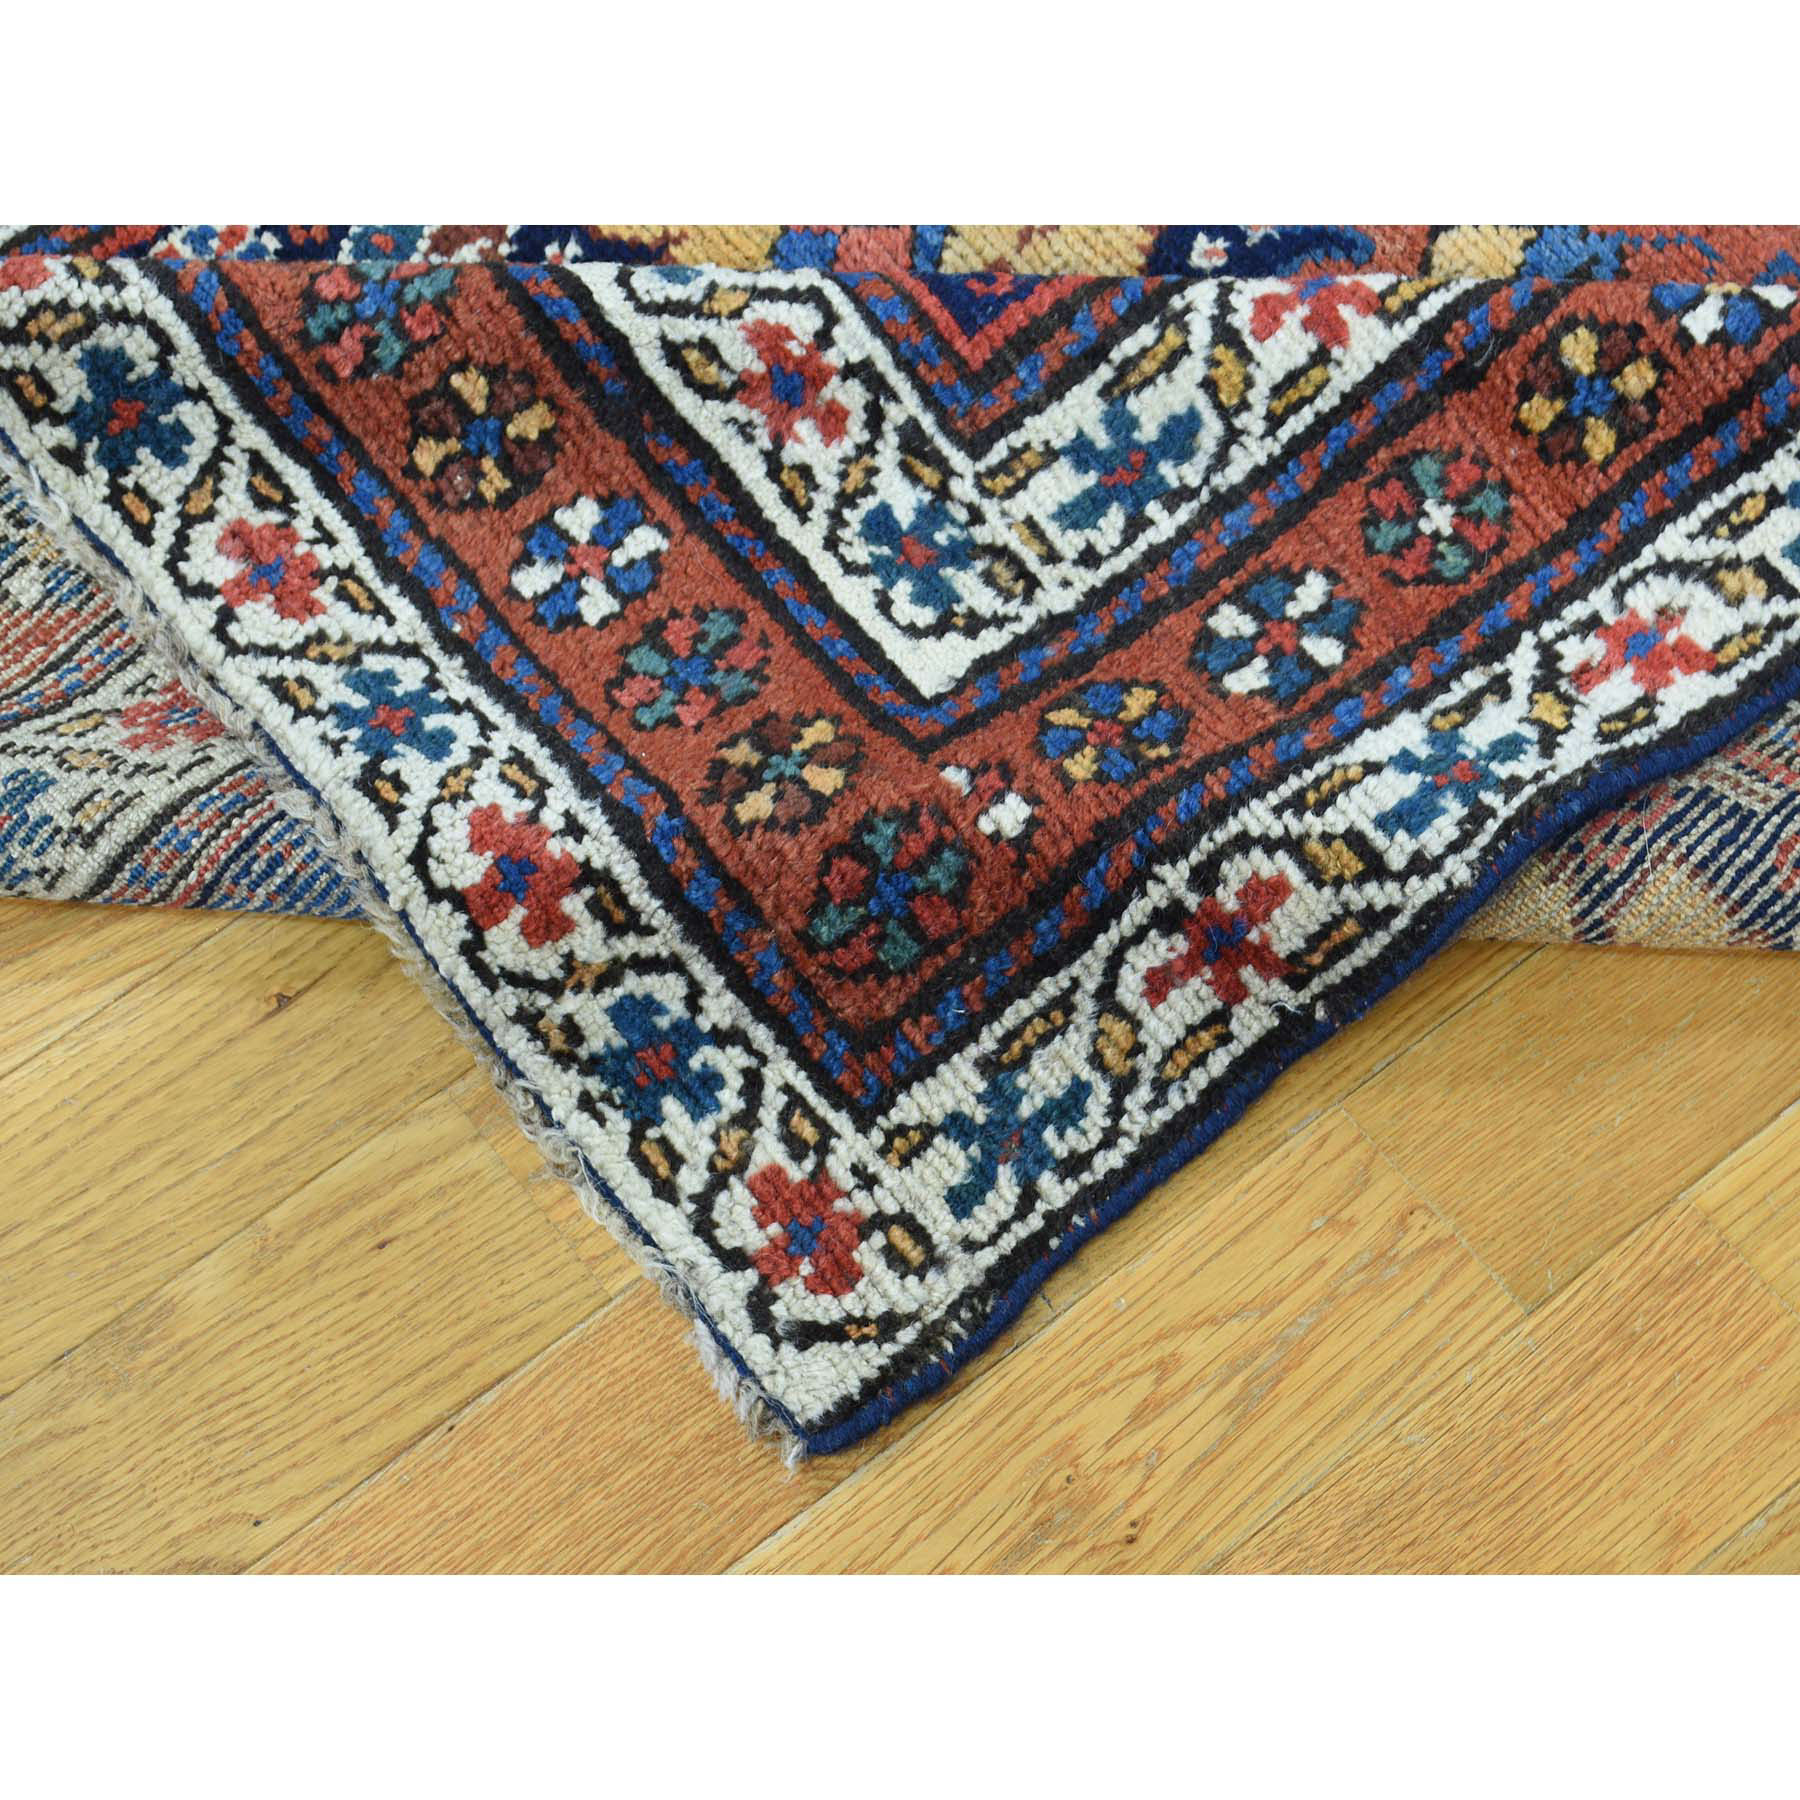 3-5 x12-9  Full Pile Antique Mint Condition Northwest Persian Wide Runner 